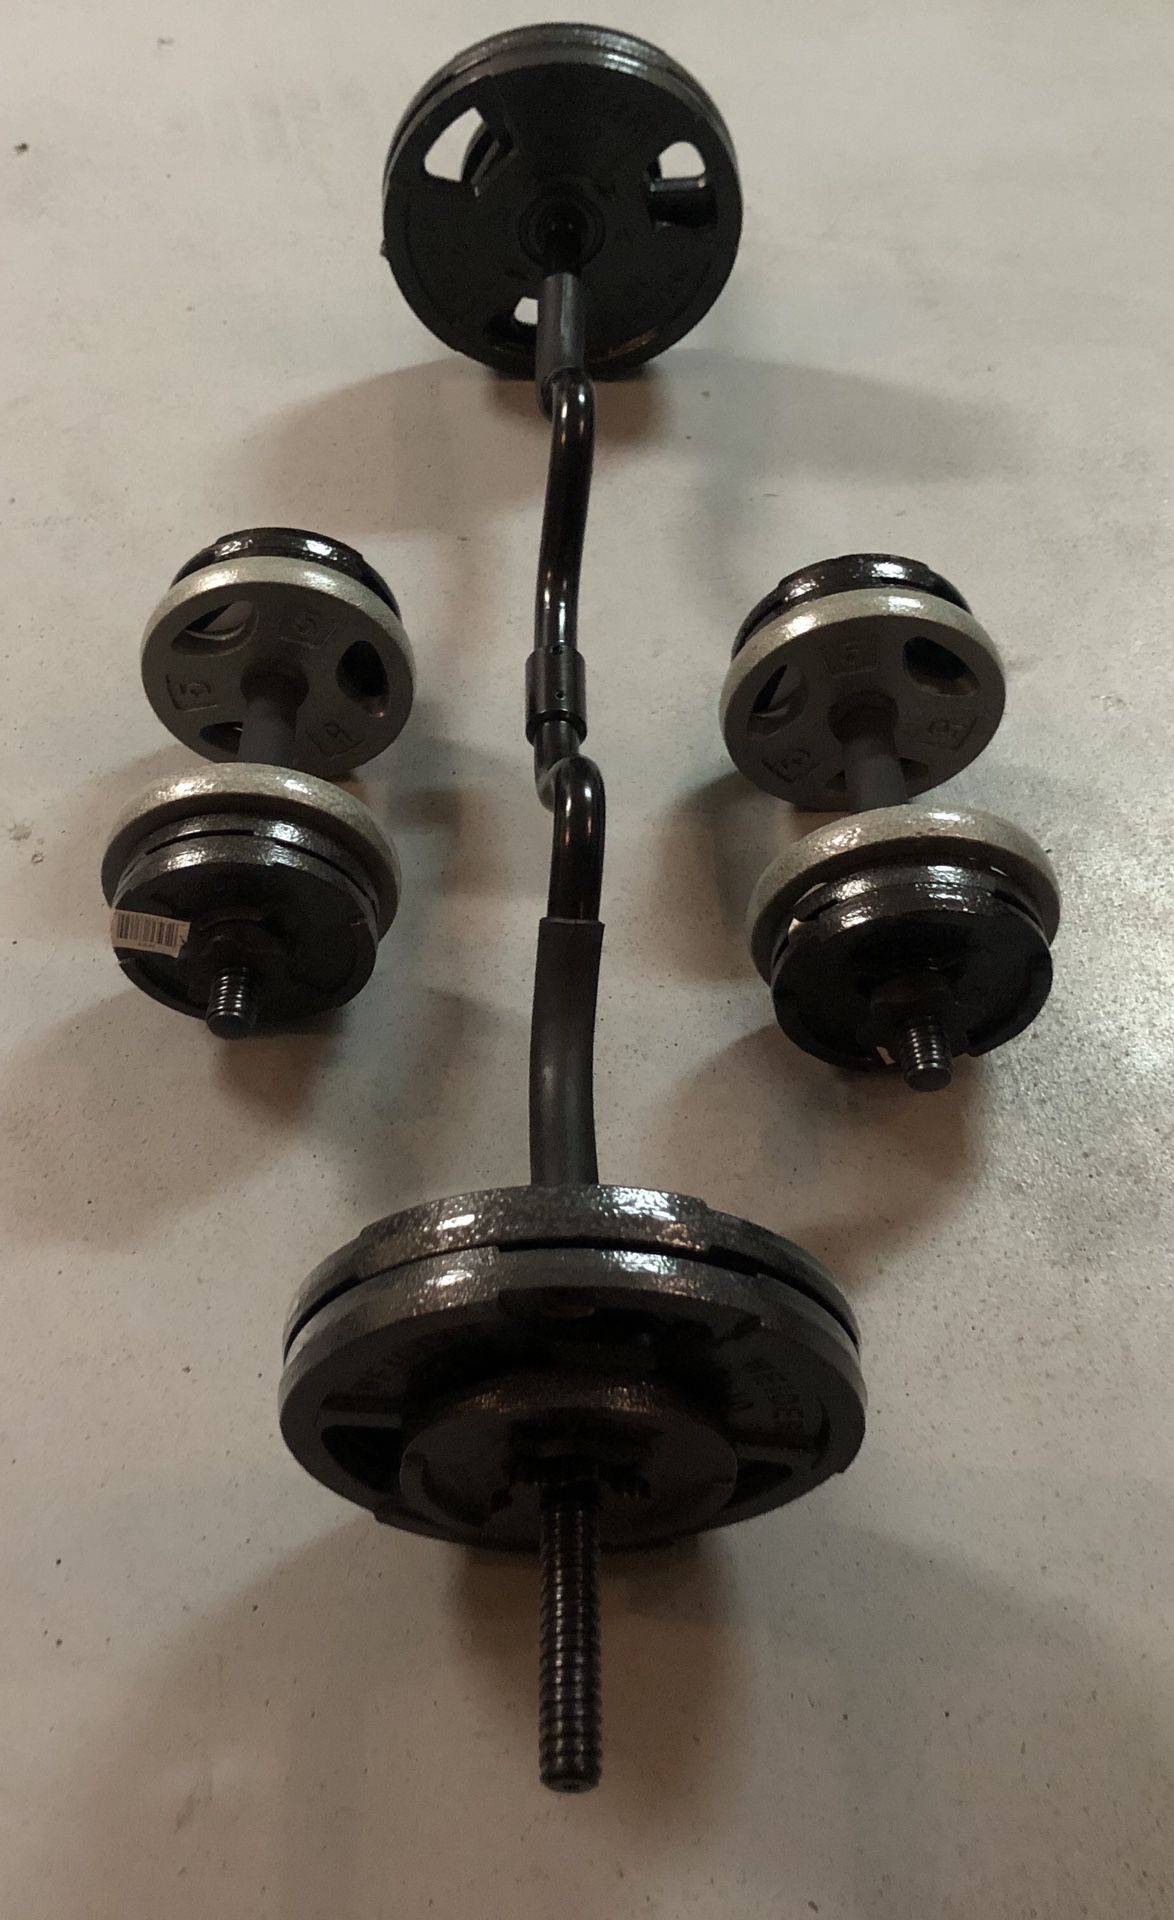 Brand new standard steel weight plates and combo curl bar, with a set of adjustable dumbbell handles!! All new!! 85lbs of weight weight plates!